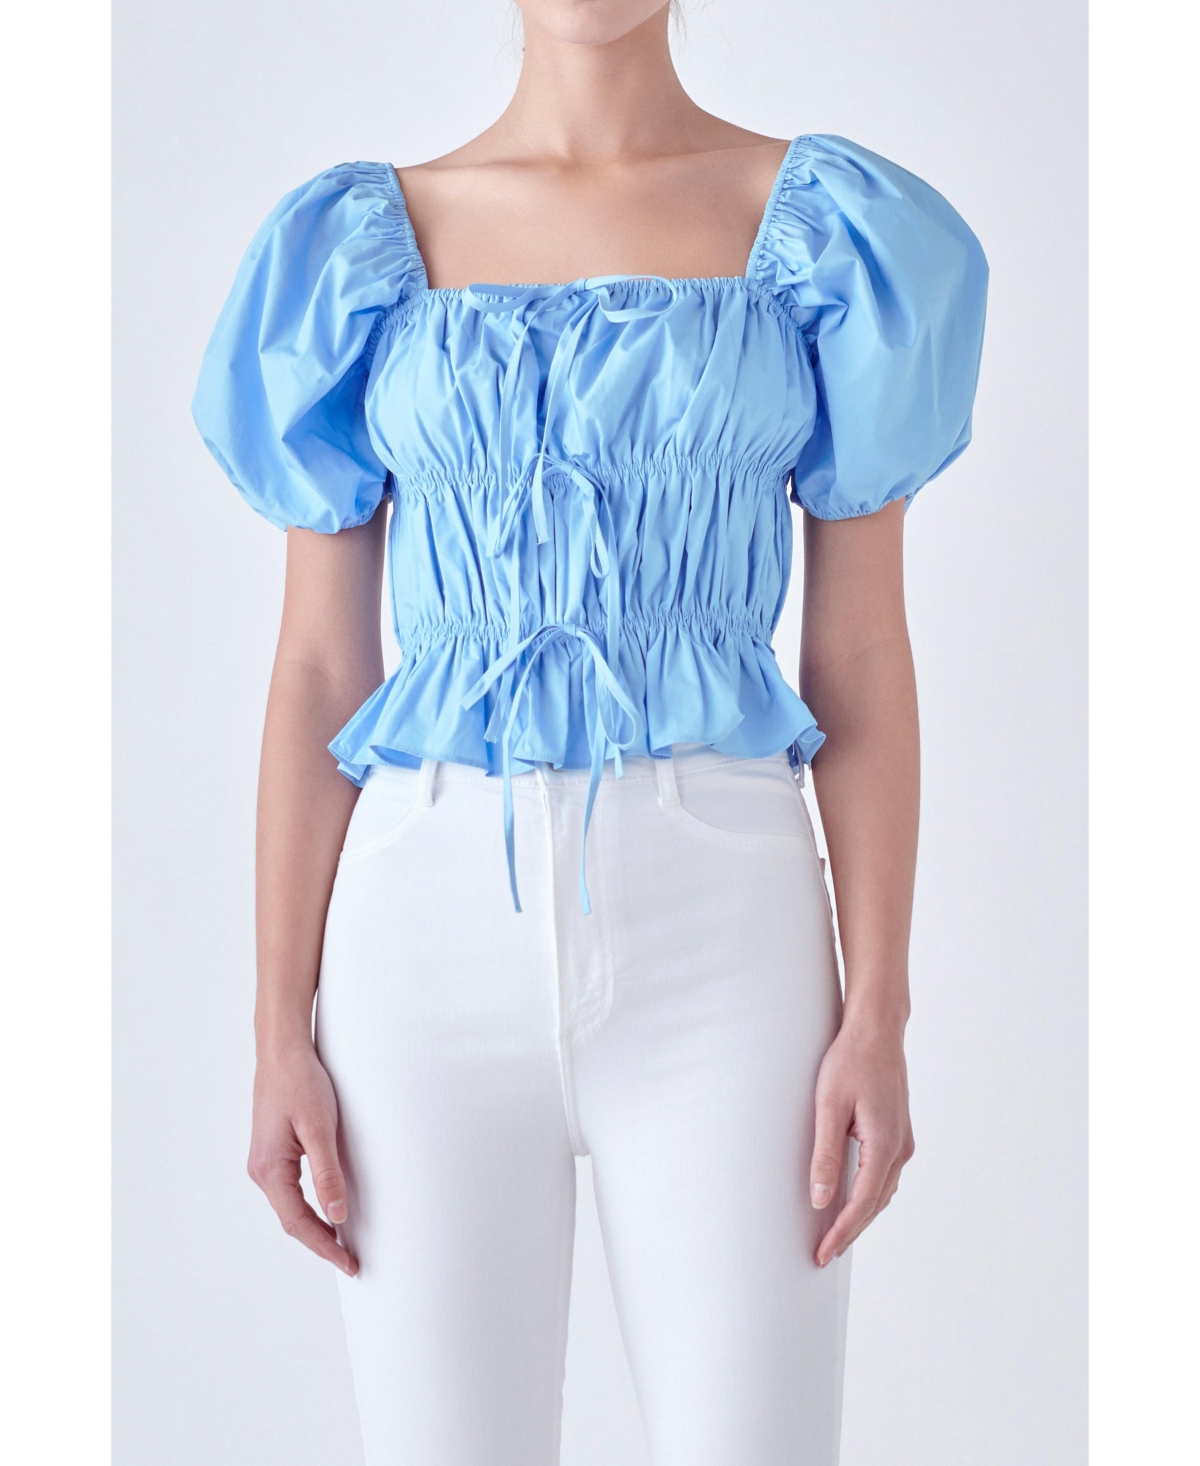 Women's Tie Detail Shirring Top with Short Sleeves - Powder blue